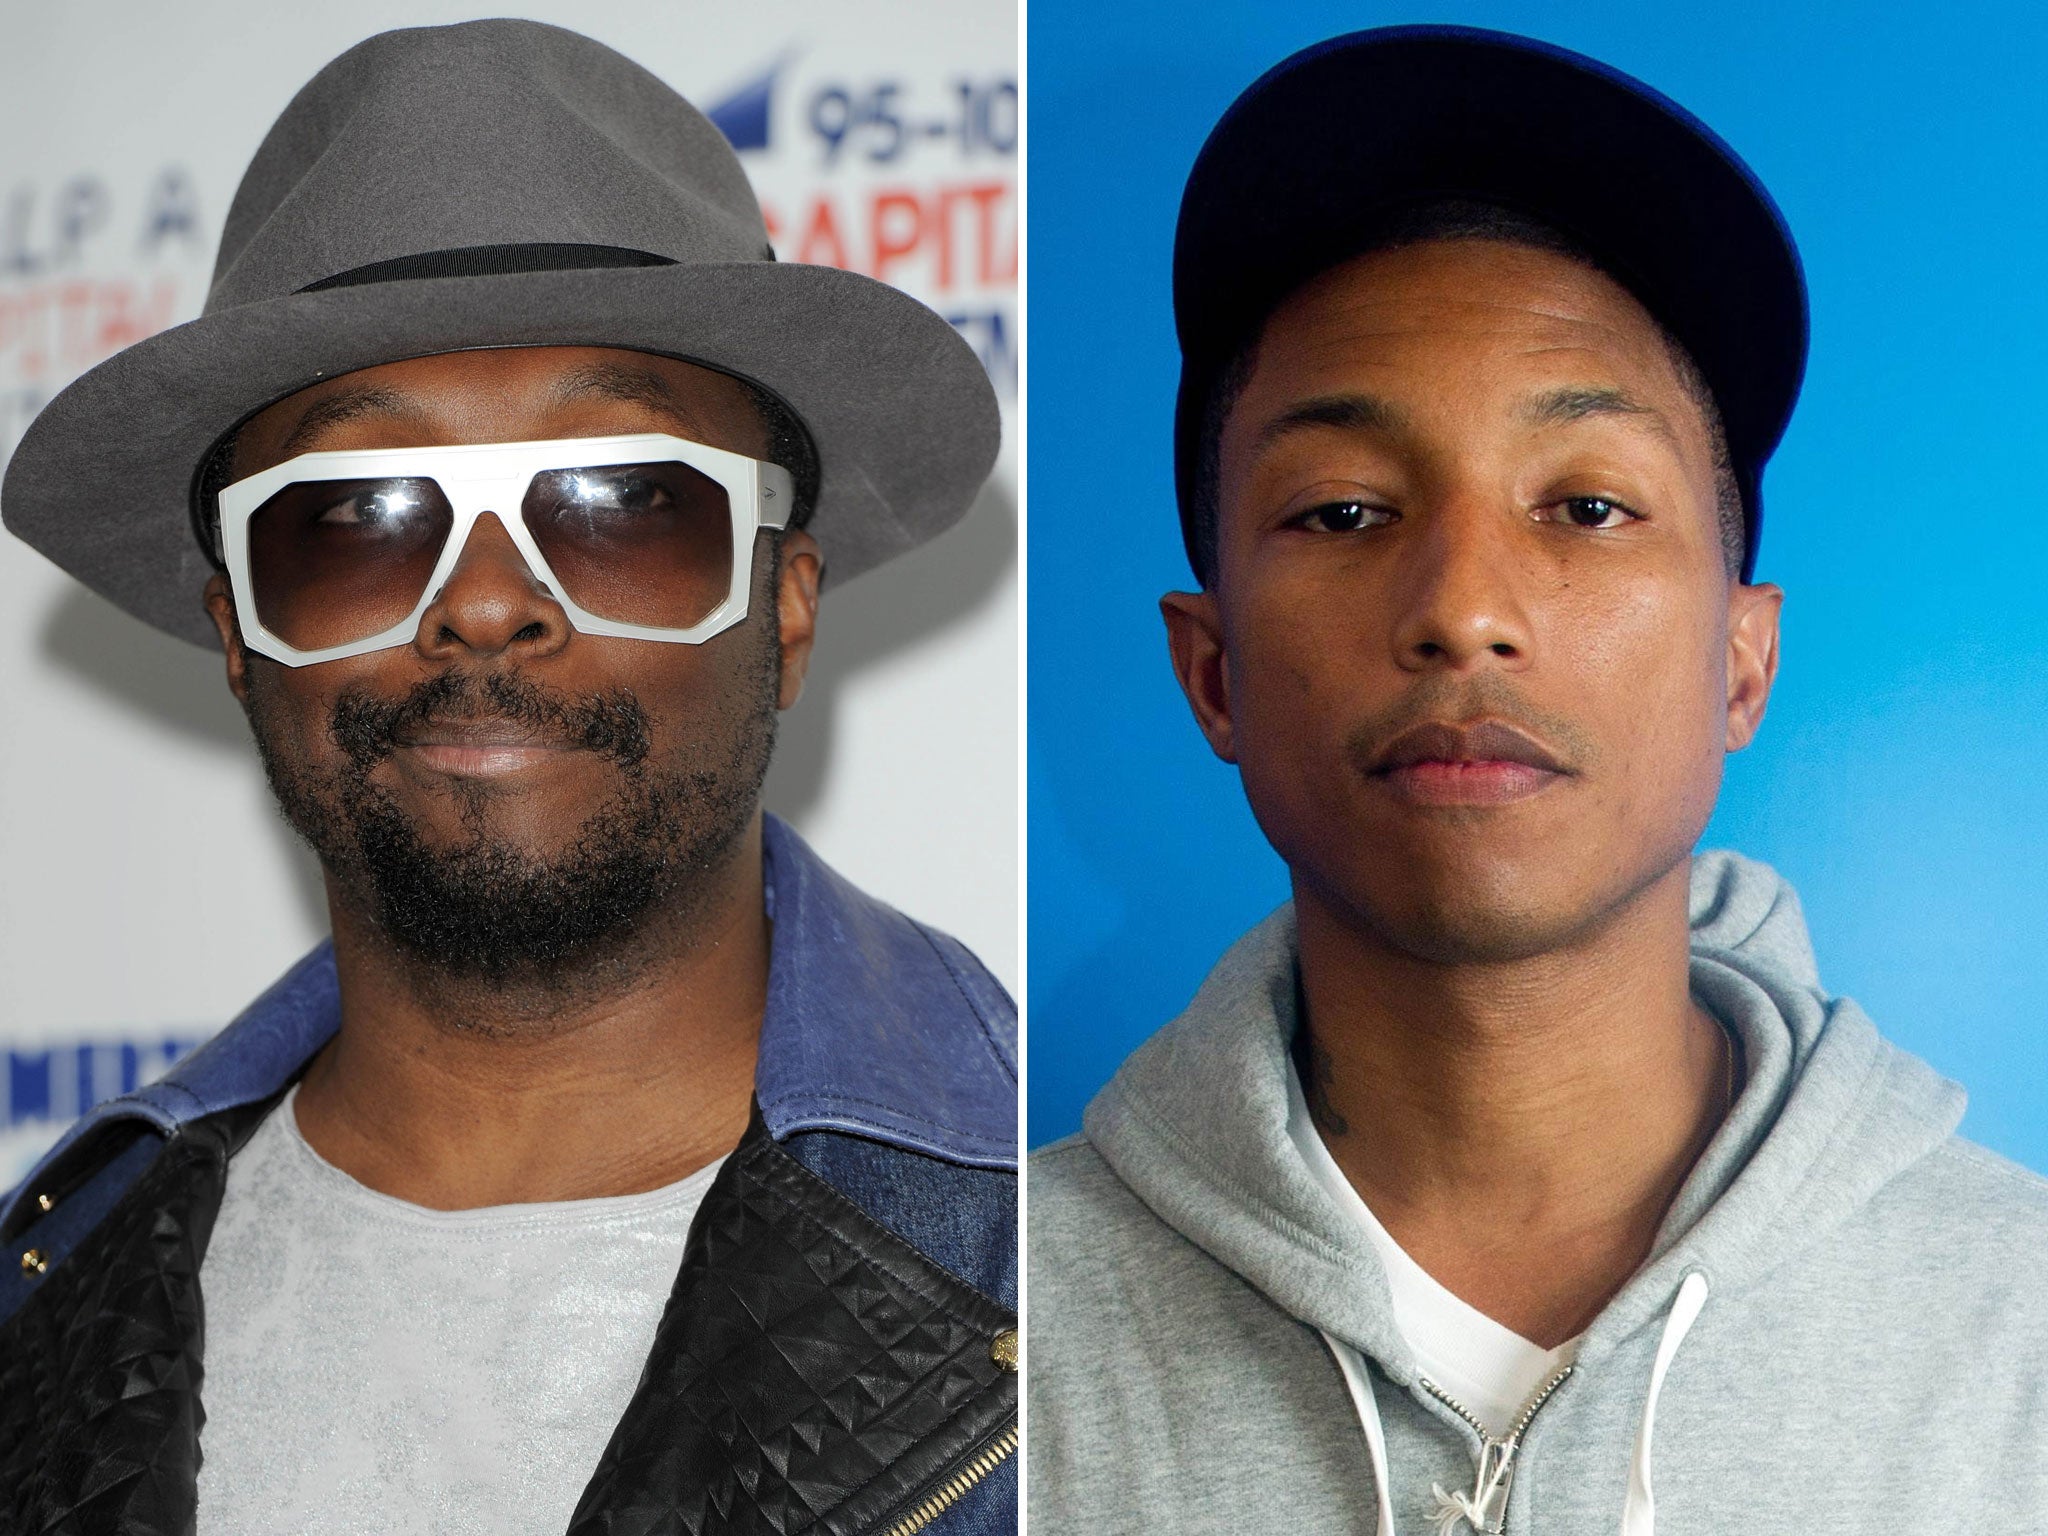 Will.i.am, left, is suing Pharrell Williams